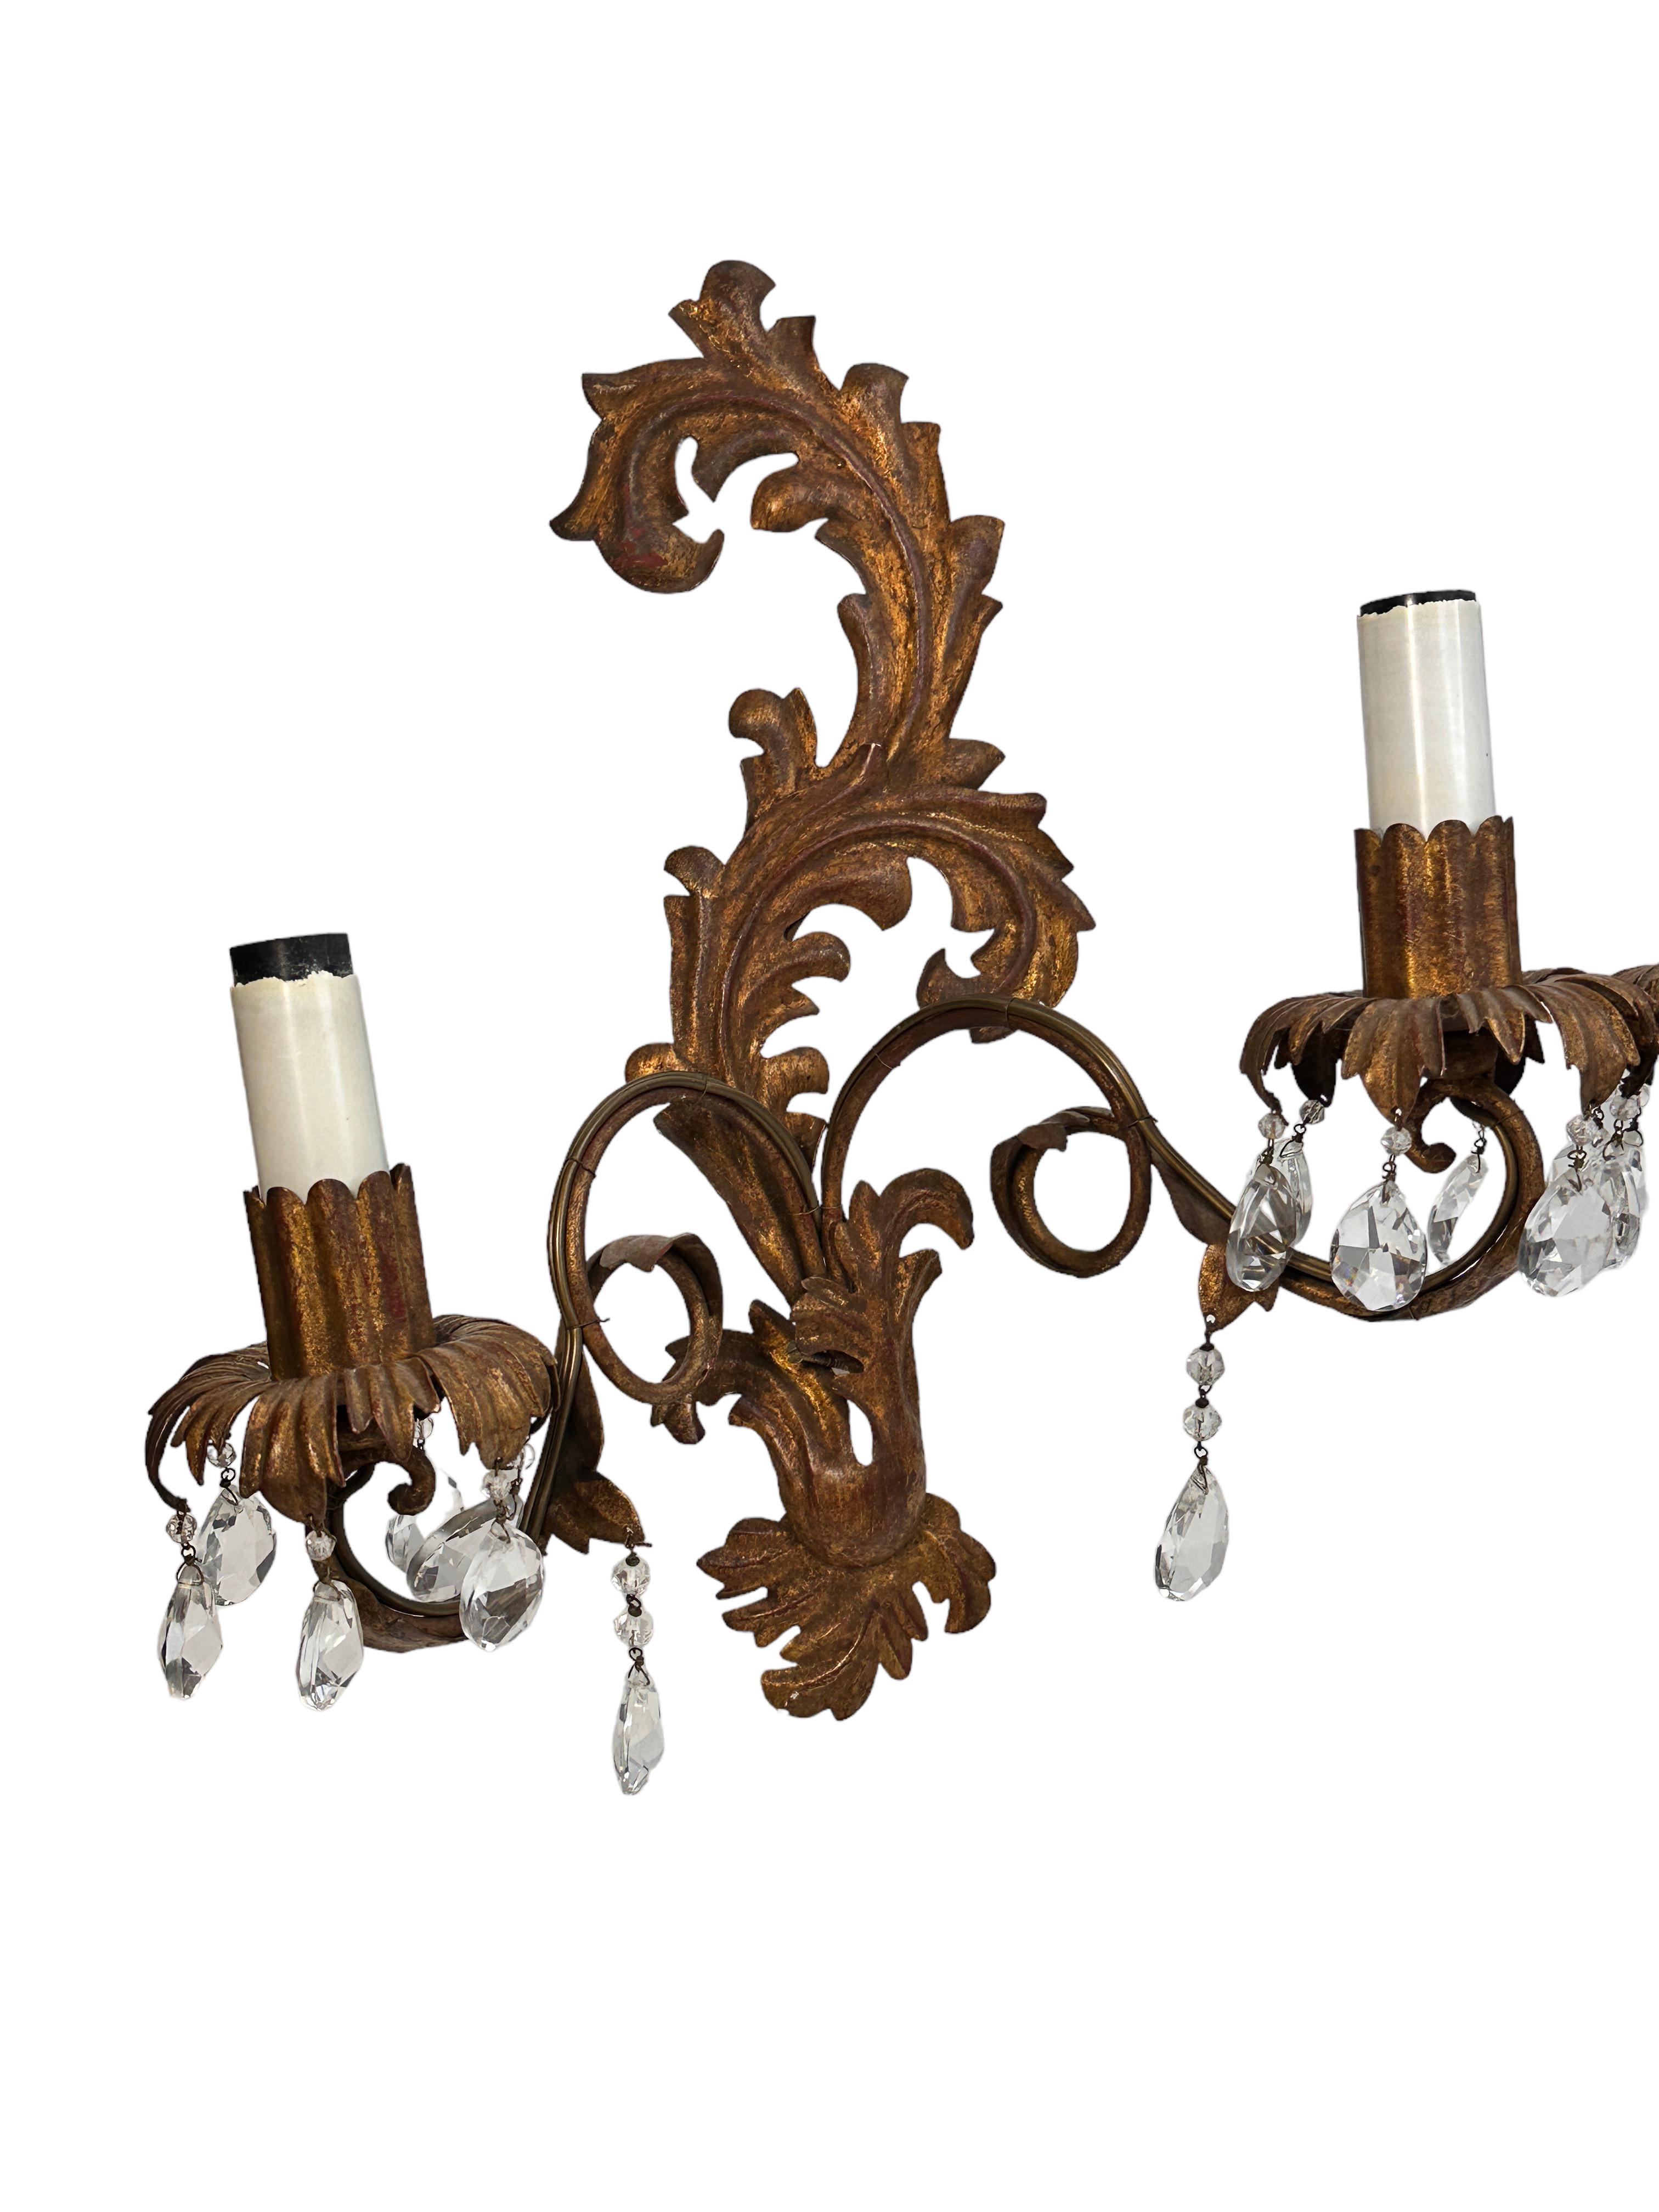 A pair metal gilded leaf sconces attributed to Banci Firenze with crystal stones. Each fixture requires two European E14 candelabra bulbs, each bulb up to 40 watts. The wall light has a beautiful patina and gives each room an eclectic statement.